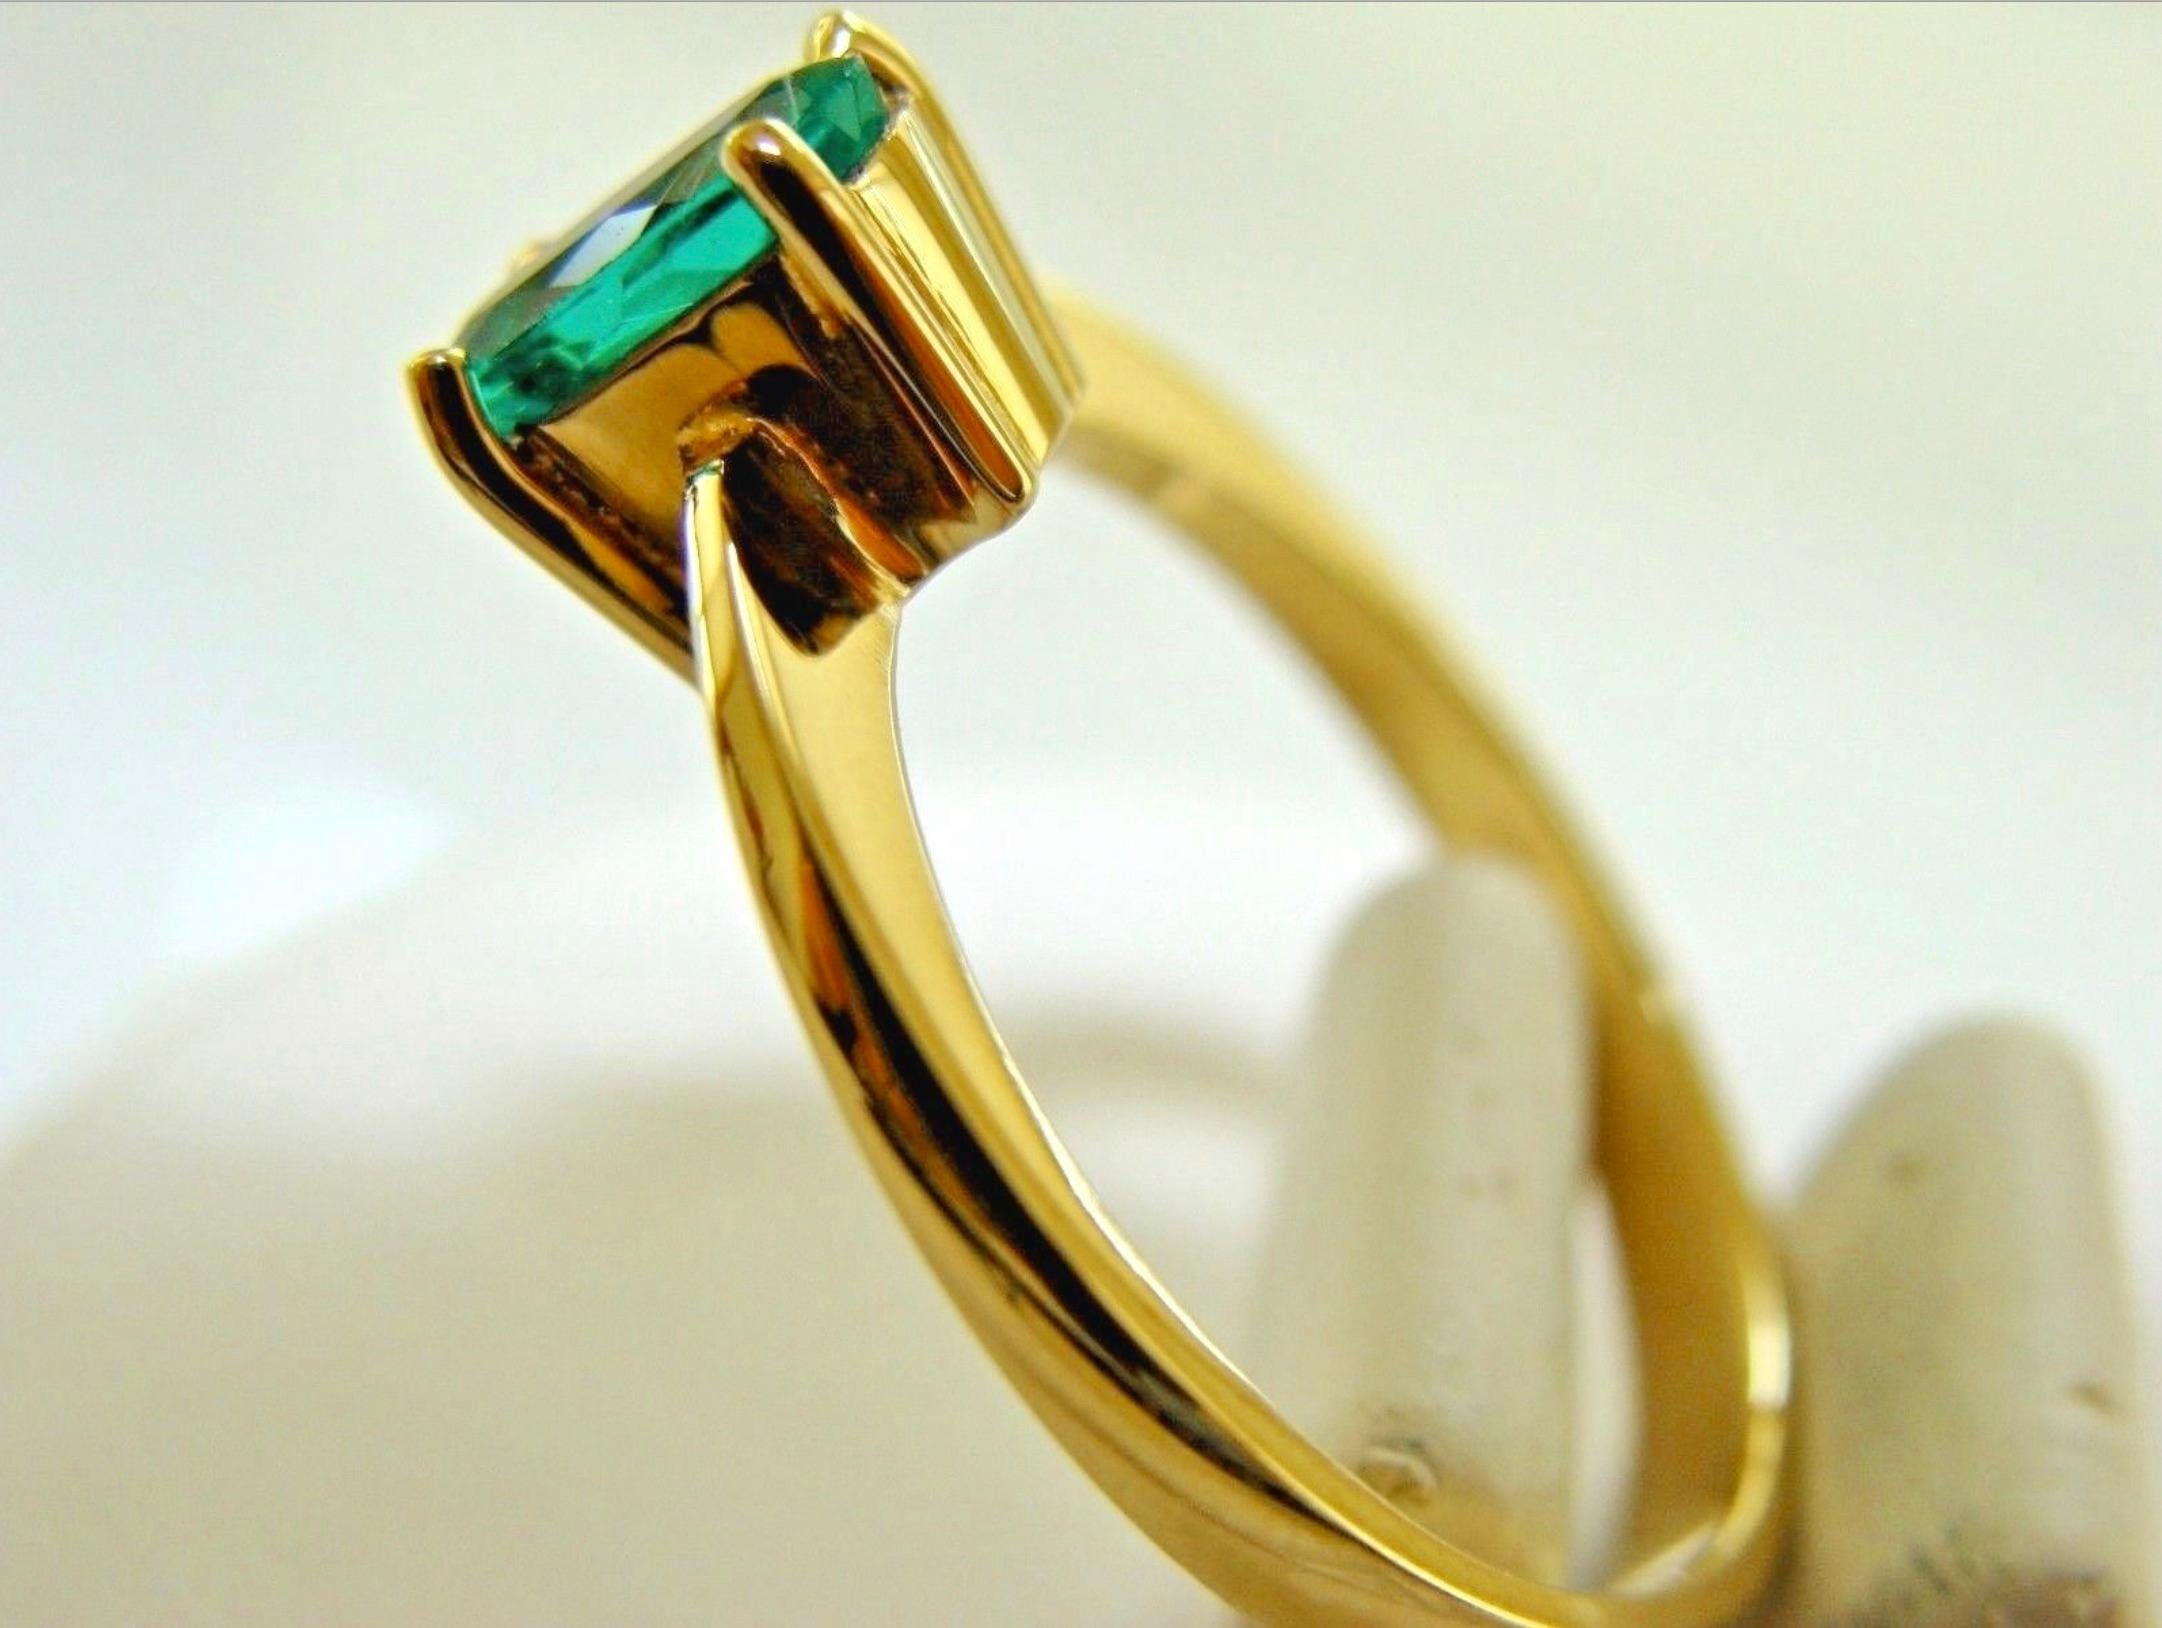 Stunning Natural Colombian Extra Fine Emerald Solitaire Ring 18K Yellow Gold
The center stone is set in a classic four Prong mounting feature one genuine and natural Colombian emerald oval cut 0.70 carats approx. weight. This Extra Fine Emerald has